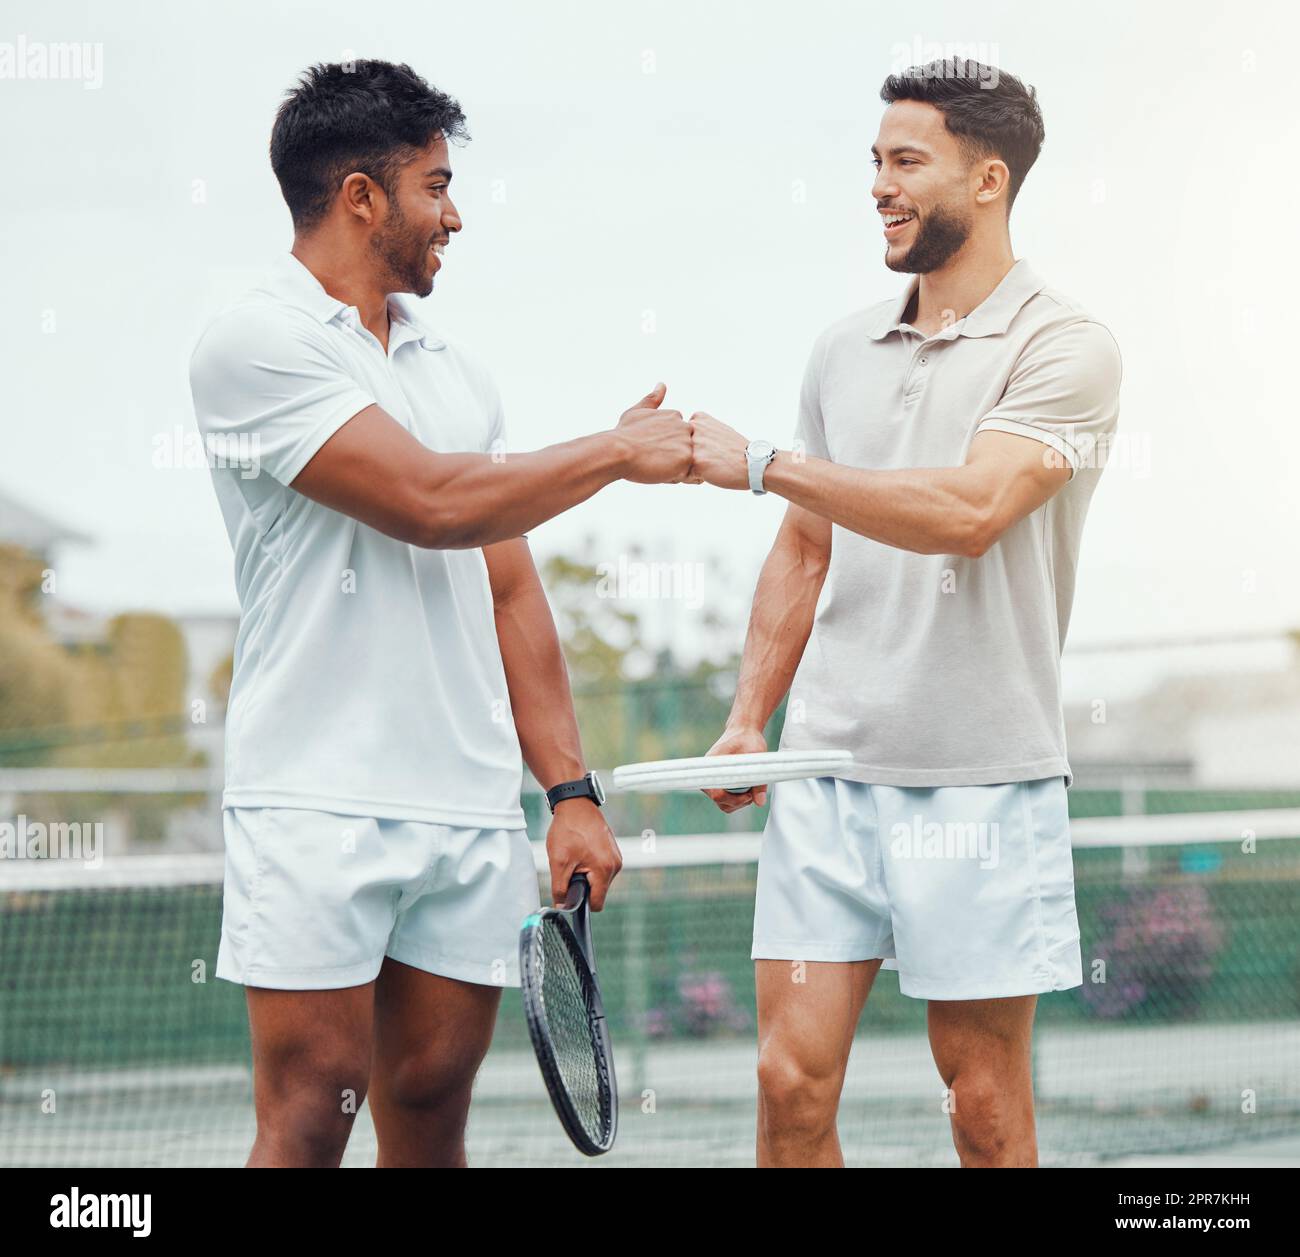 Two smiling ethnic tennis players giving fistbump with fist before playing court game. Fit athletes team standing and using hand gesture for good luck. Play competitive sports match for health fitness Stock Photo